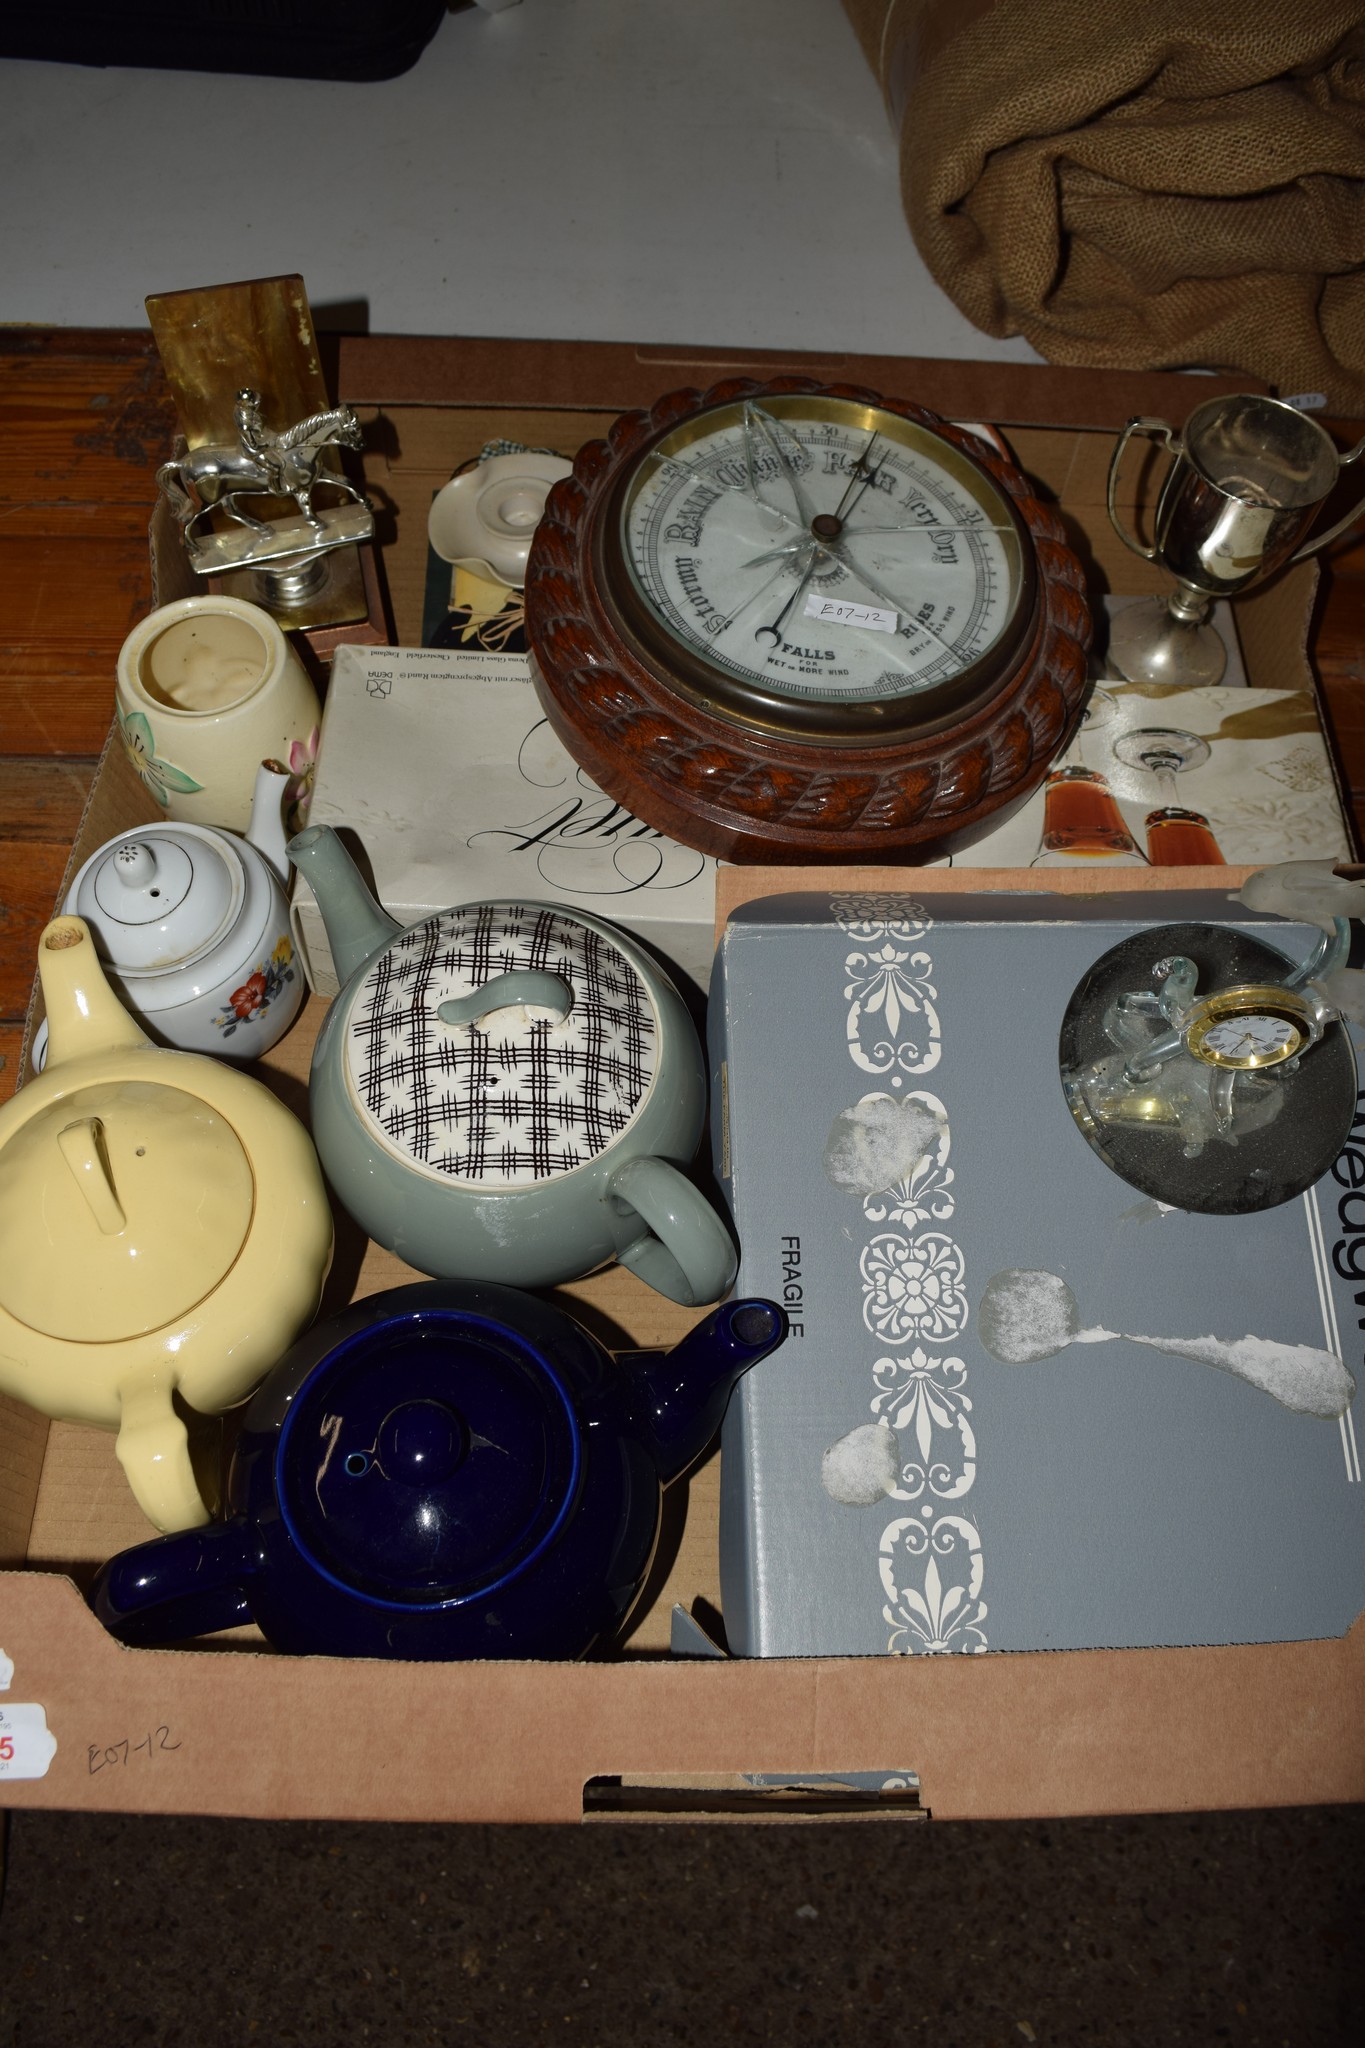 TRAY CONTAINING CERAMIC TEA POTS, A BAROMETER IN WOODEN FRAME, A HORSE SHOW AWARD ETC